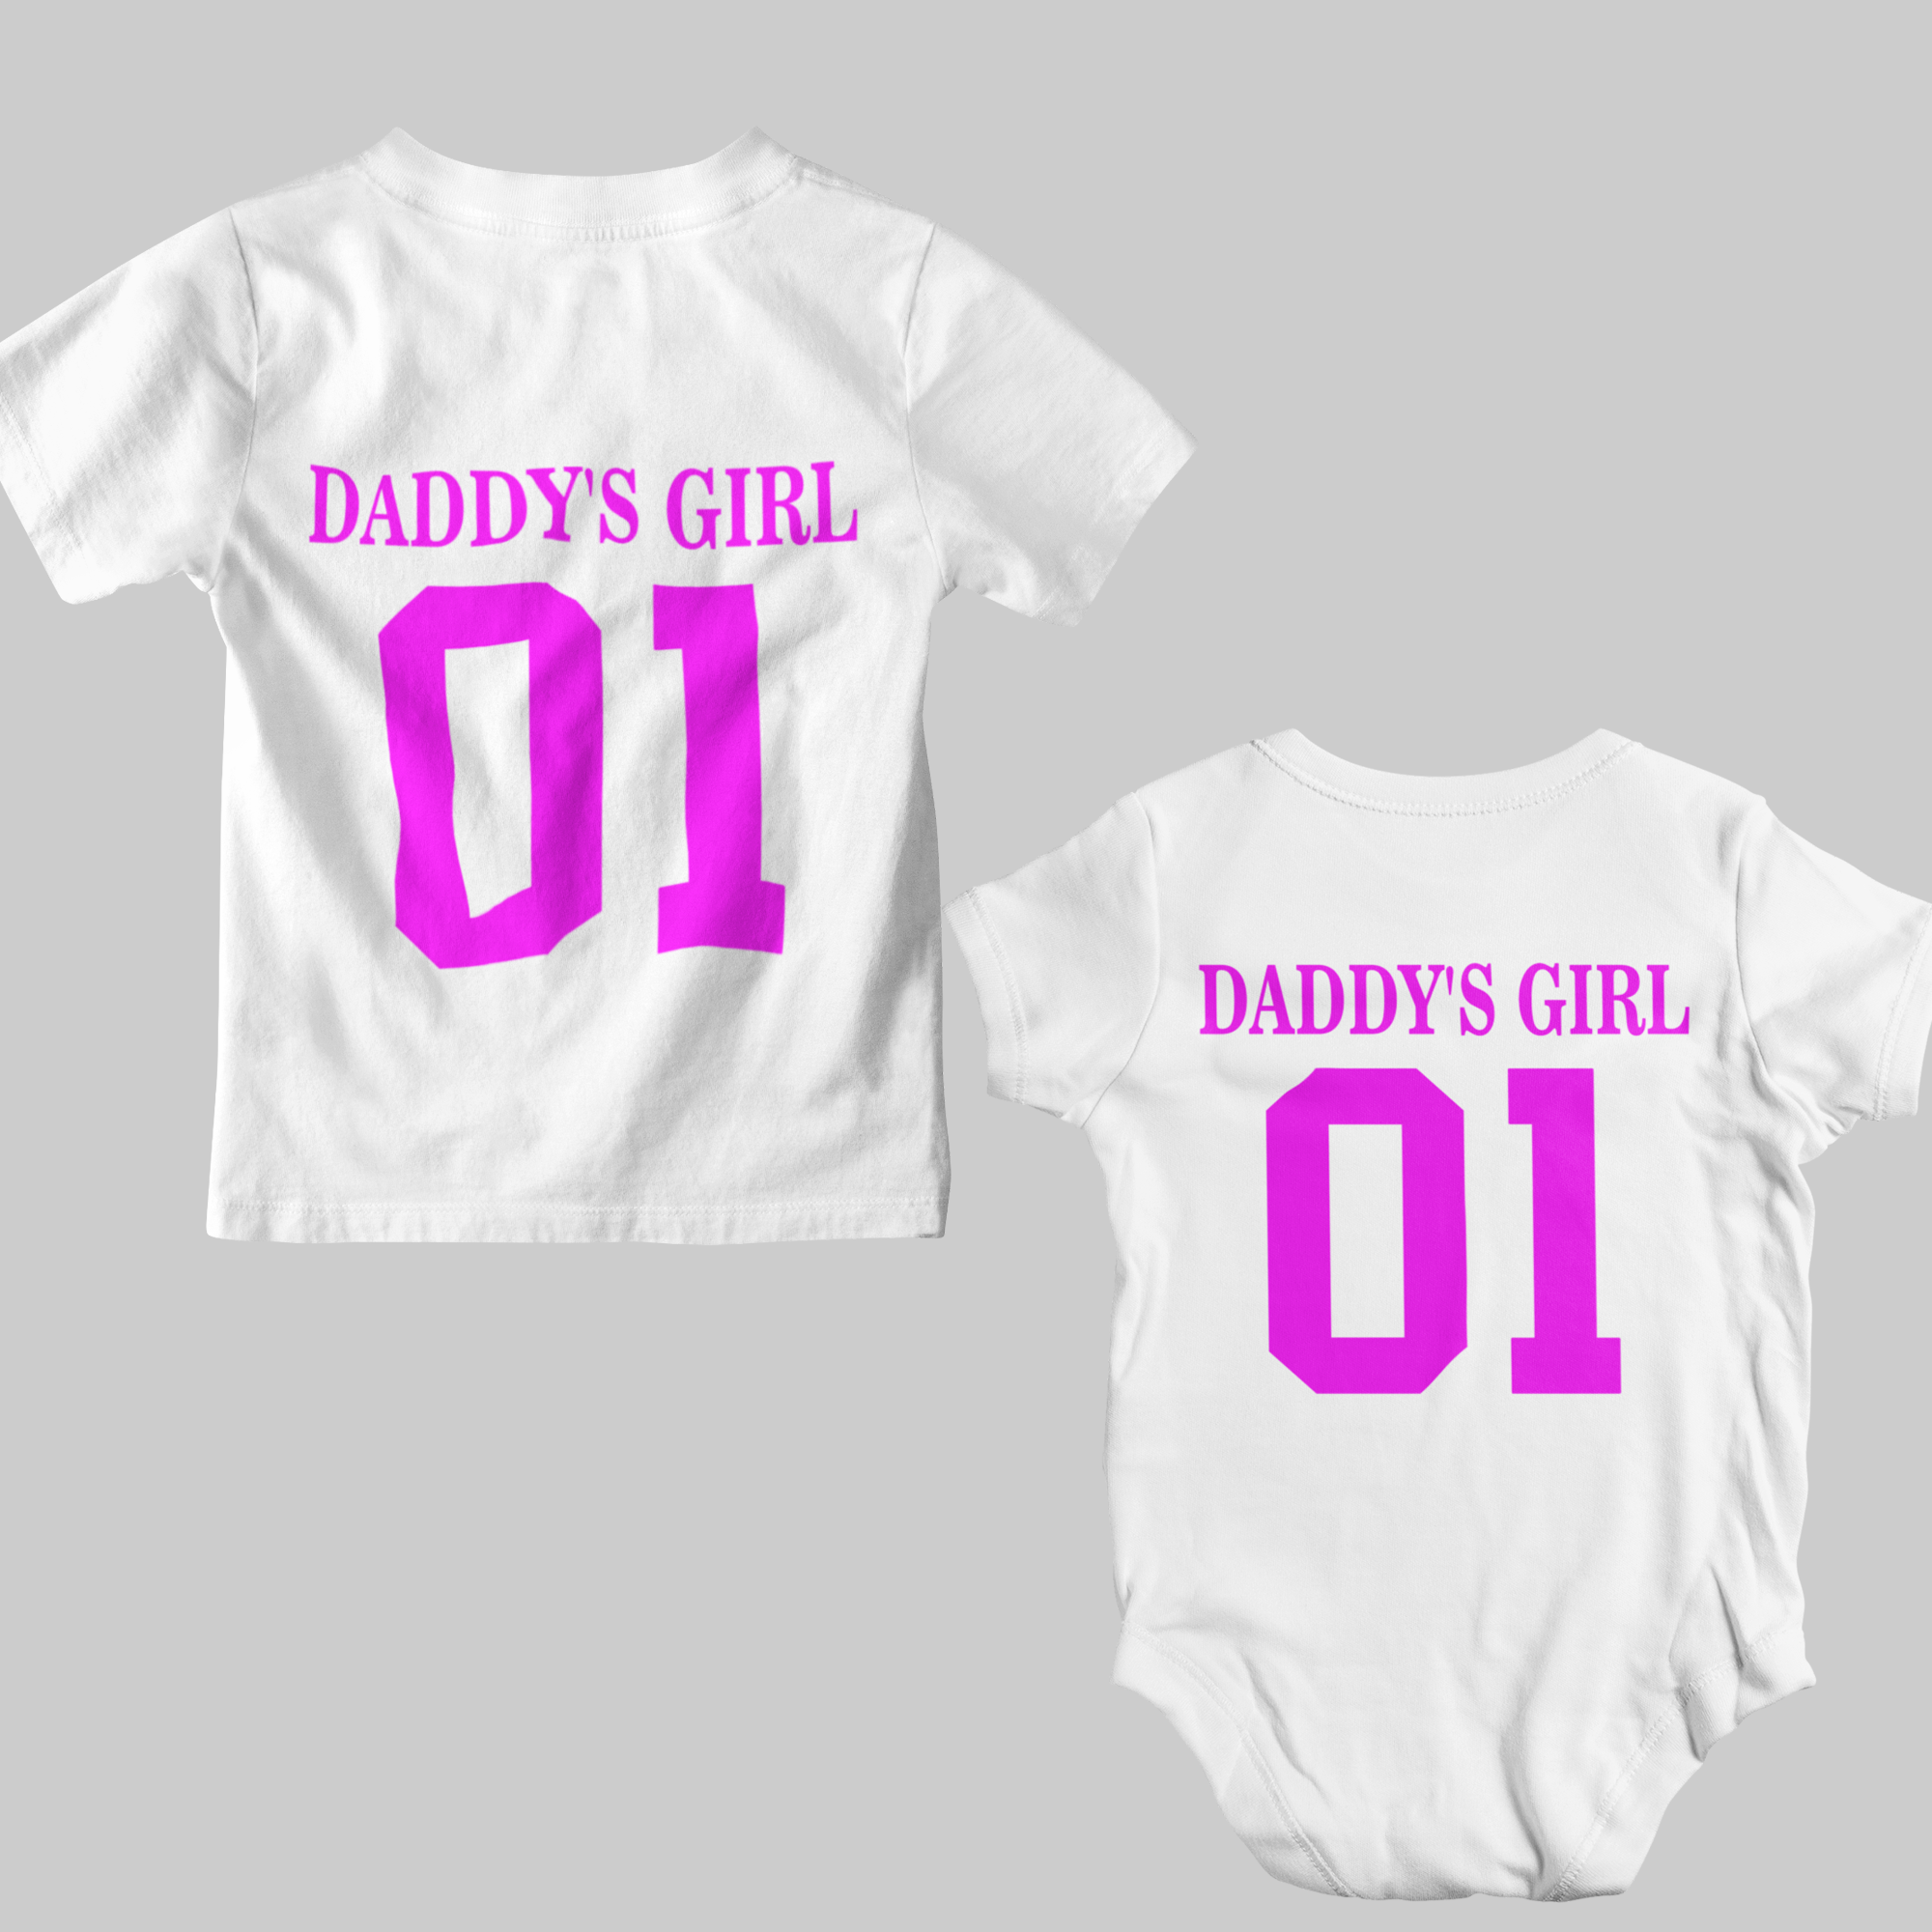 Daddy + Daddy's Girl Number Combo Black & White- Adult Tshirt + Kids Tshirt